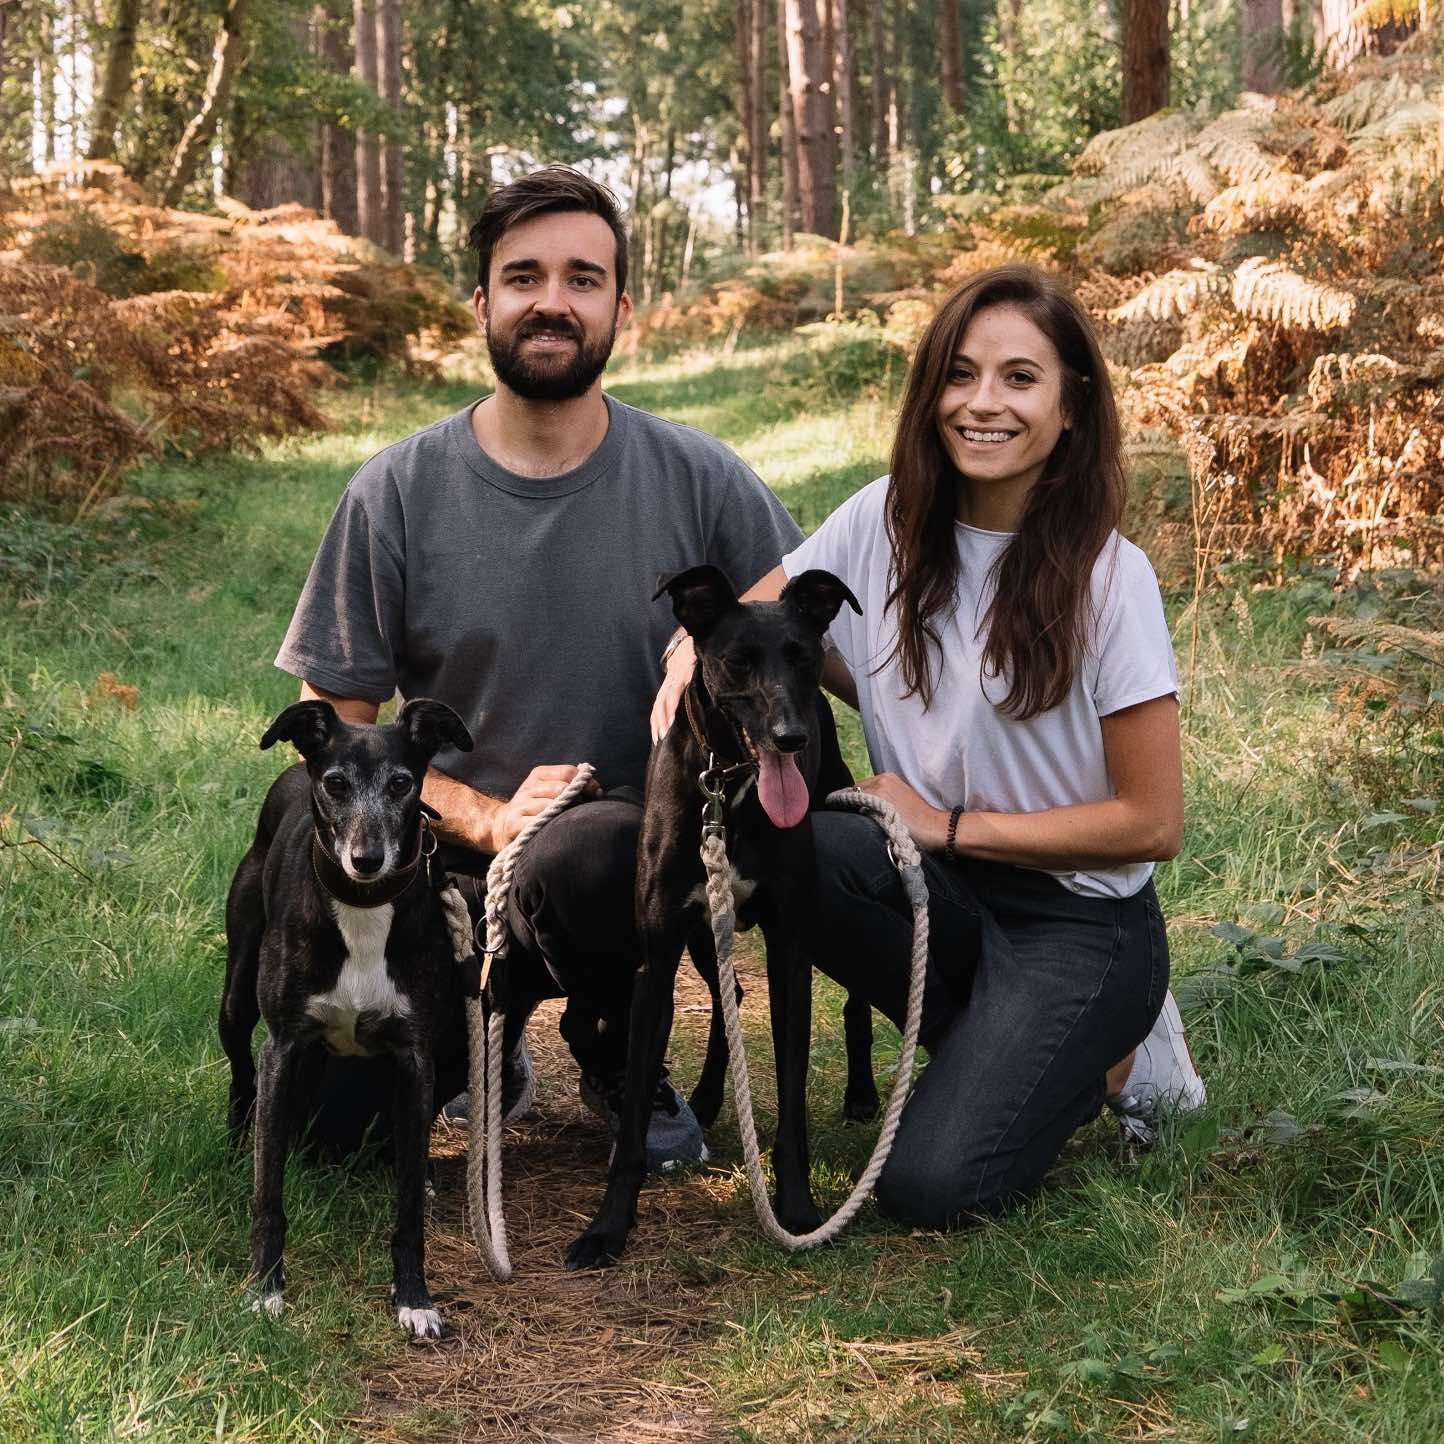 Meet the Smug Mutts Team, Owners and there Two Black Dog Crouch Down